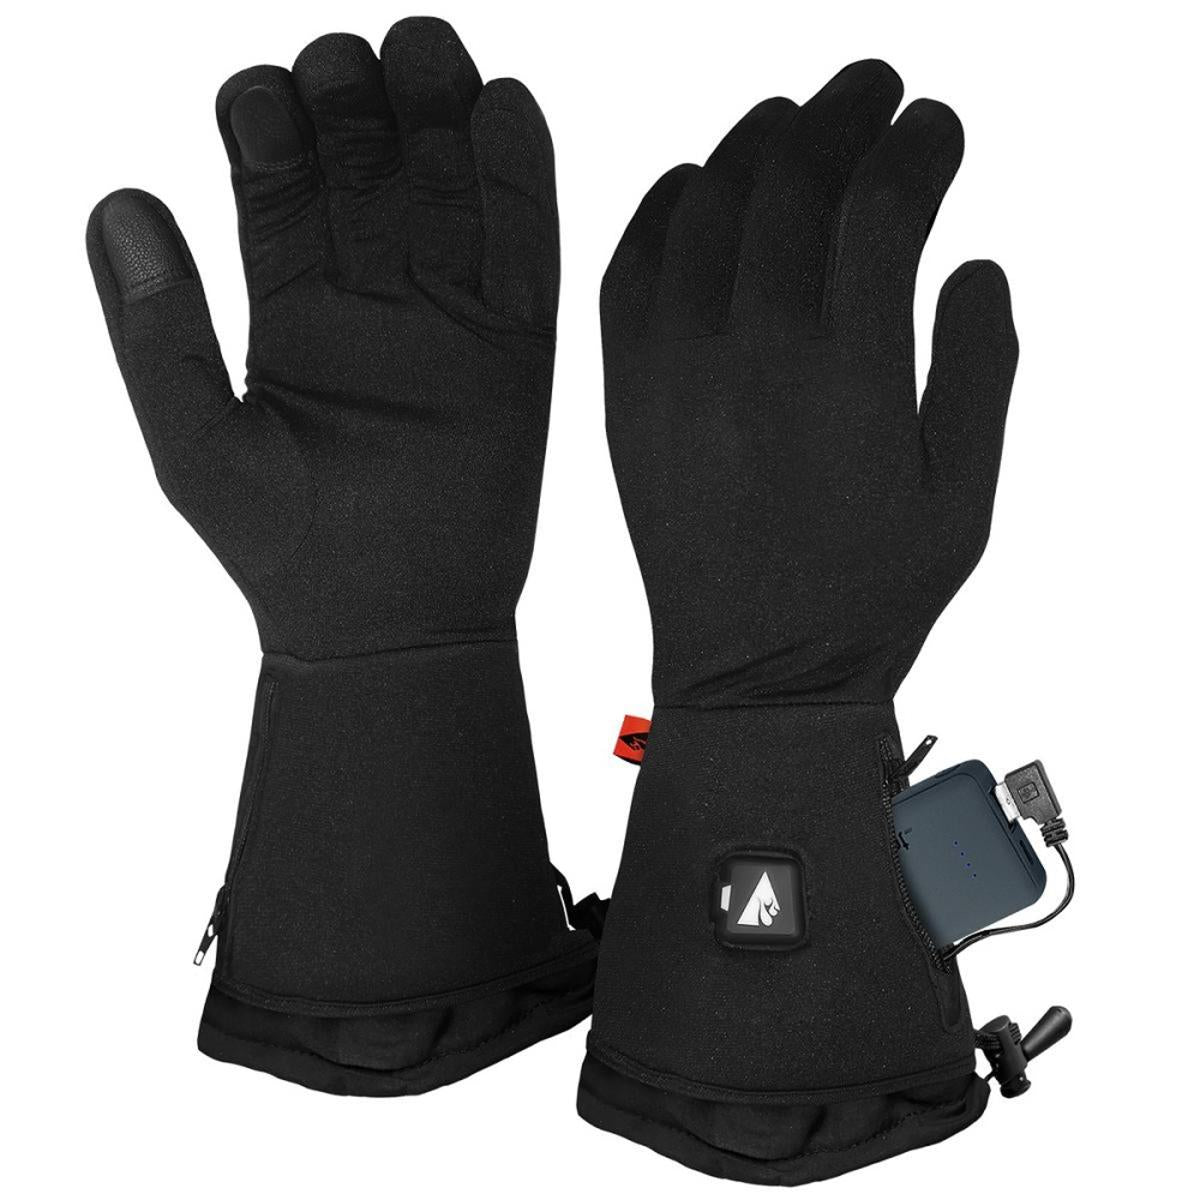 Open Box ActionHeat 5V Heated Glove Liners - Women's - Heated